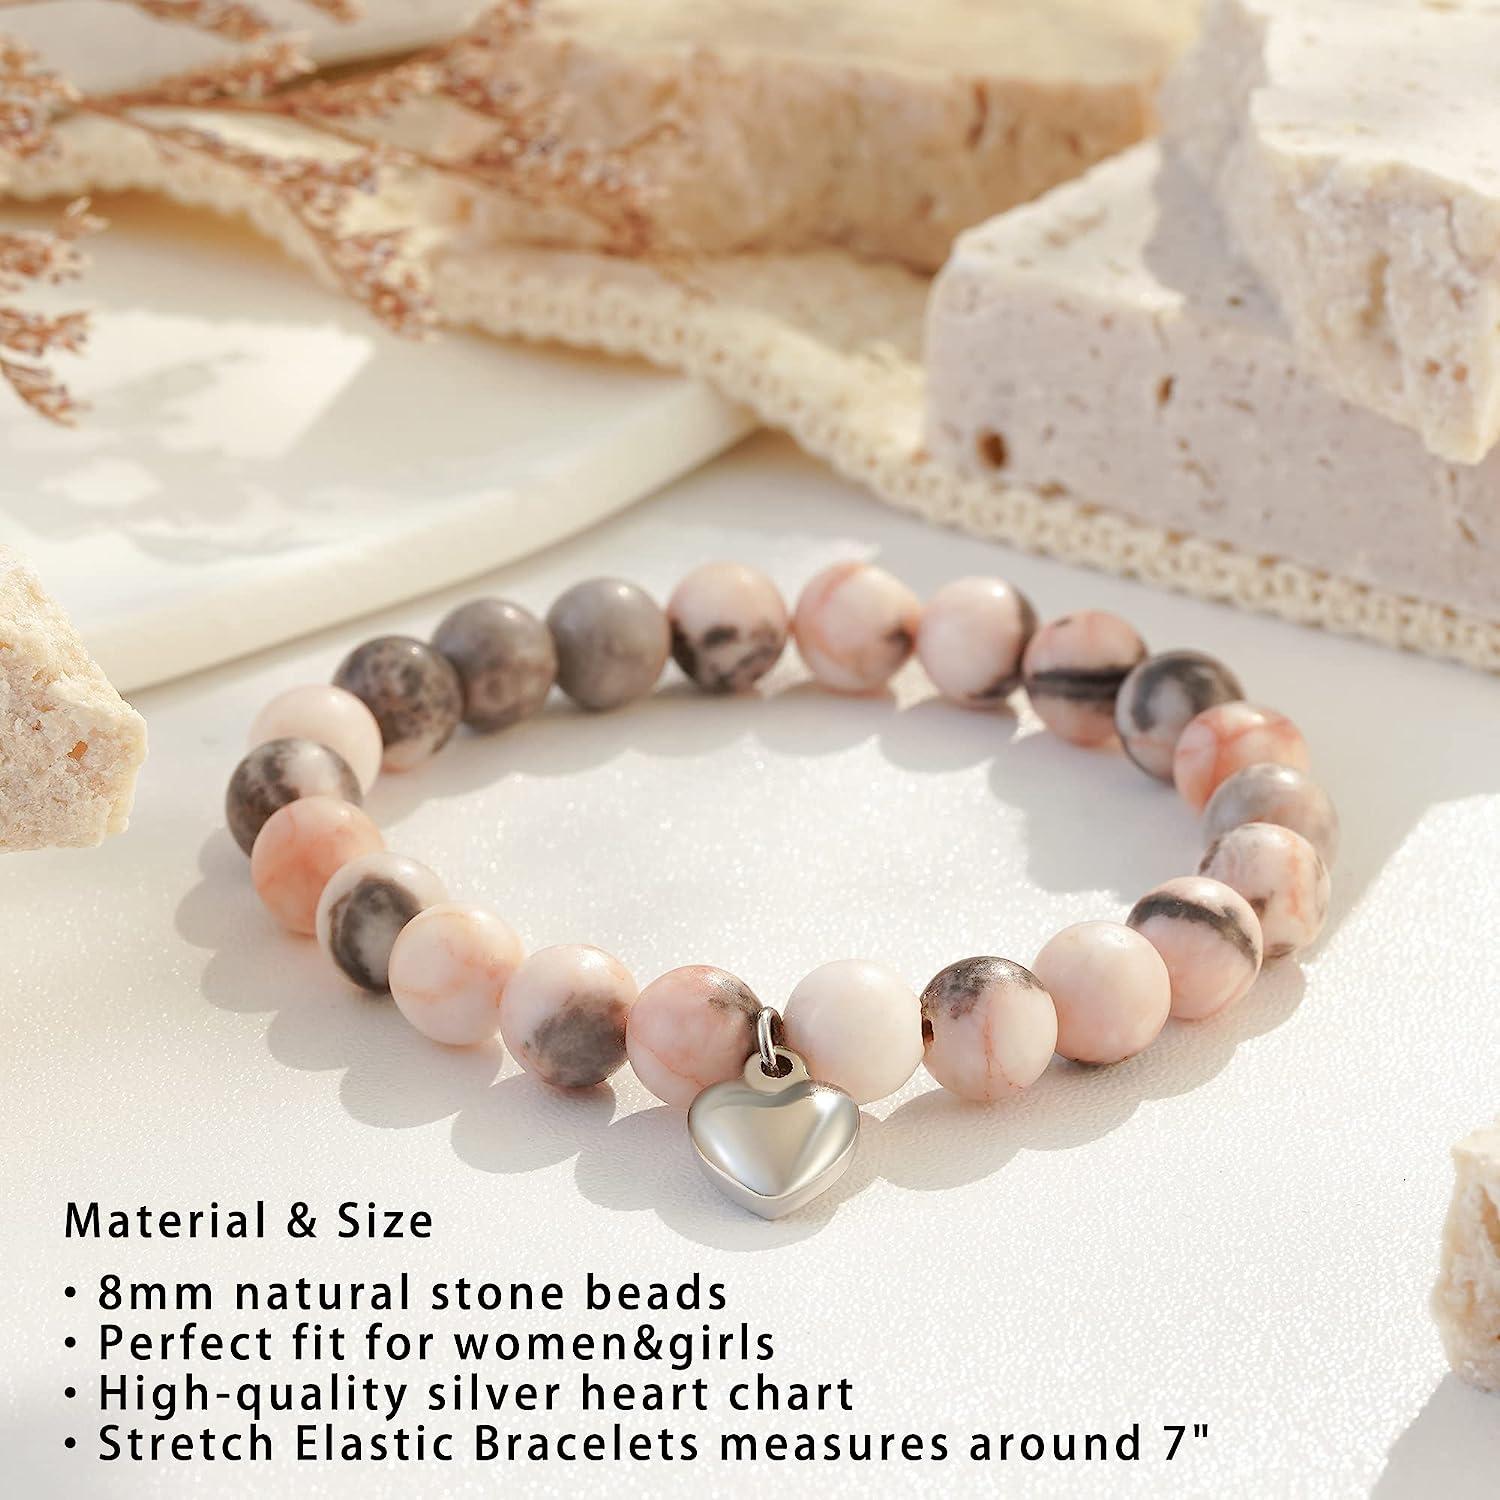 Lotus Charmed Aroma Bracelet Natural Stone Prayer Jewelry For Women,  Perfect For Health, Fashion, Parties, And Yoga Lucky Blessing Gift R230905  From Stylishchannelbags, $11.31 | DHgate.Com